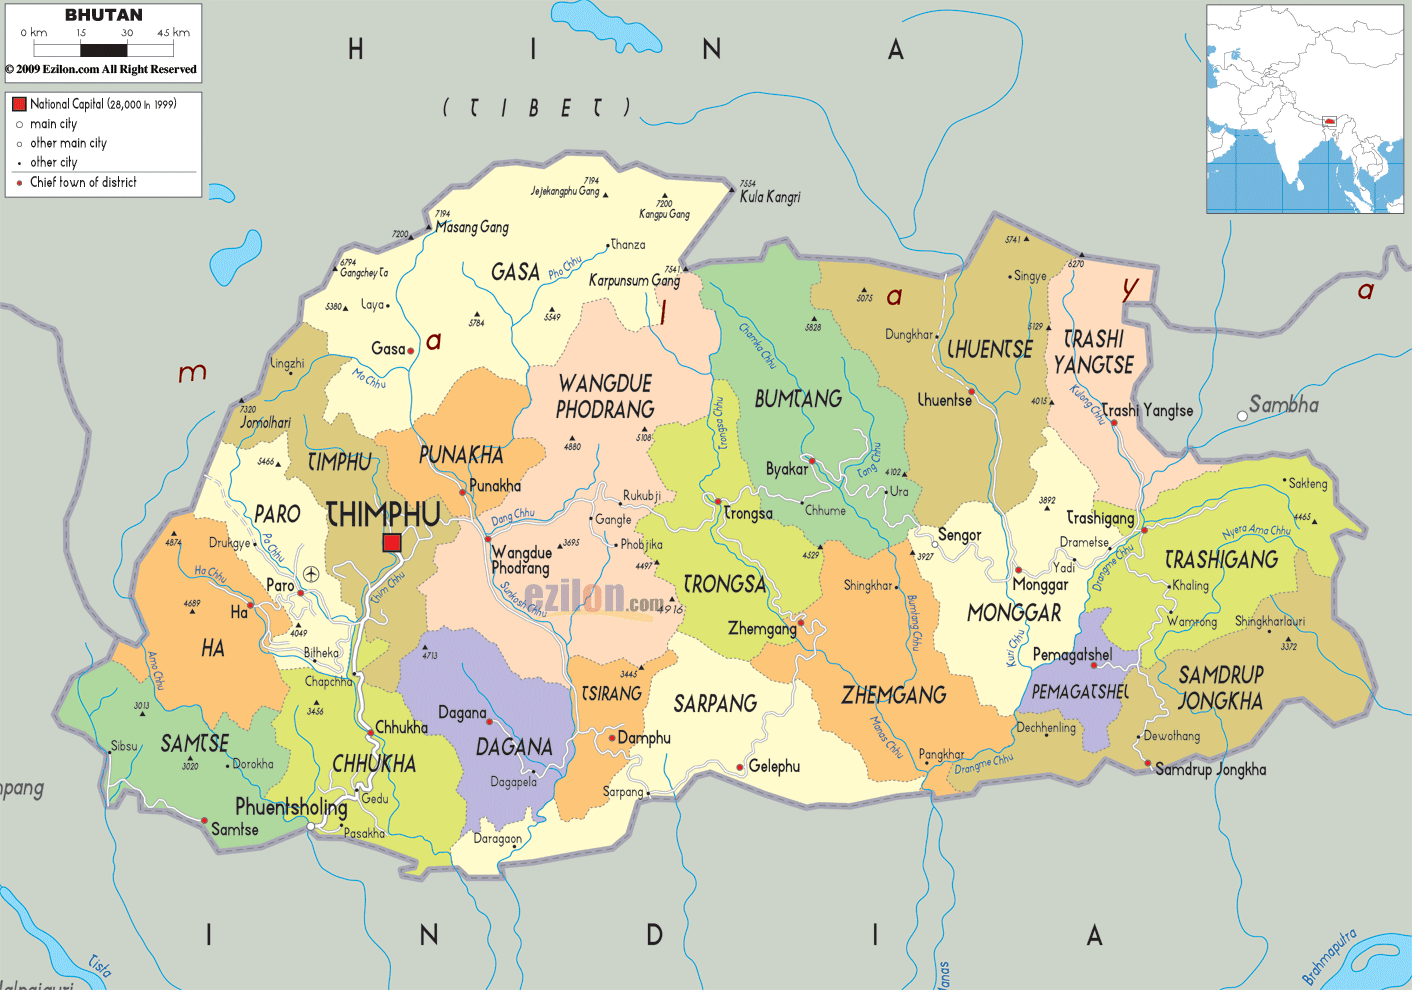 The Geography and Demography of Bhutan.